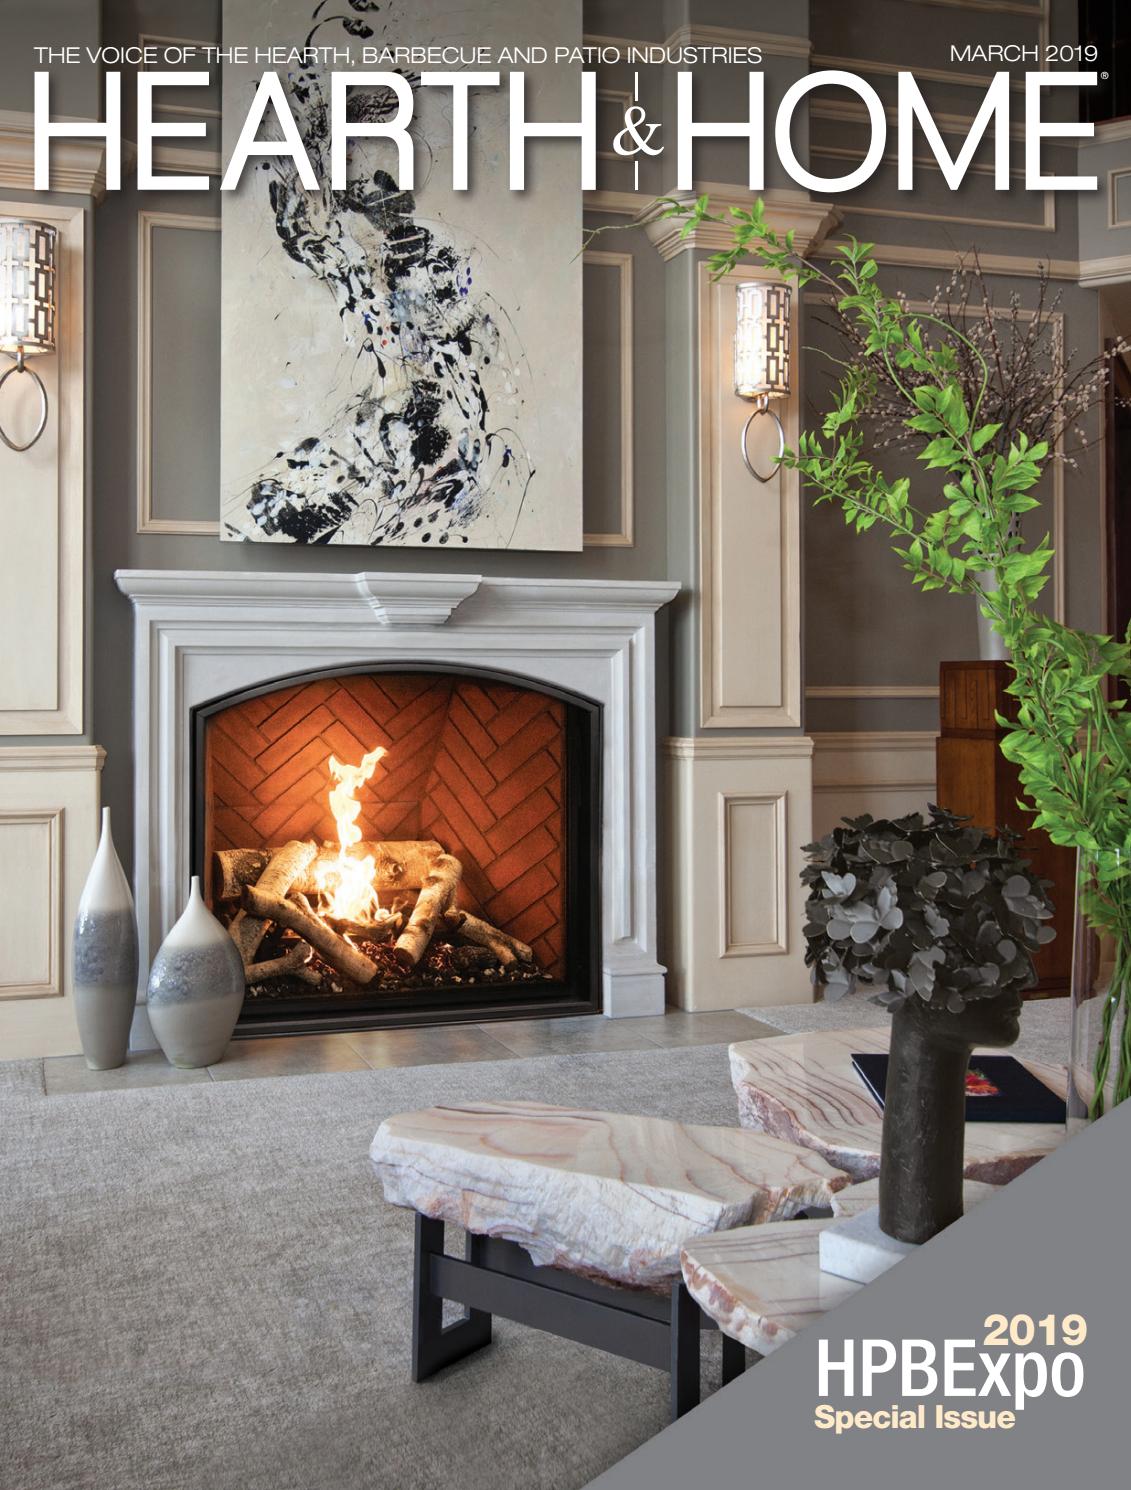 Mendota Fireplace Inserts Best Of Hearth & Home Magazine – 2019 March issue by Hearth & Home